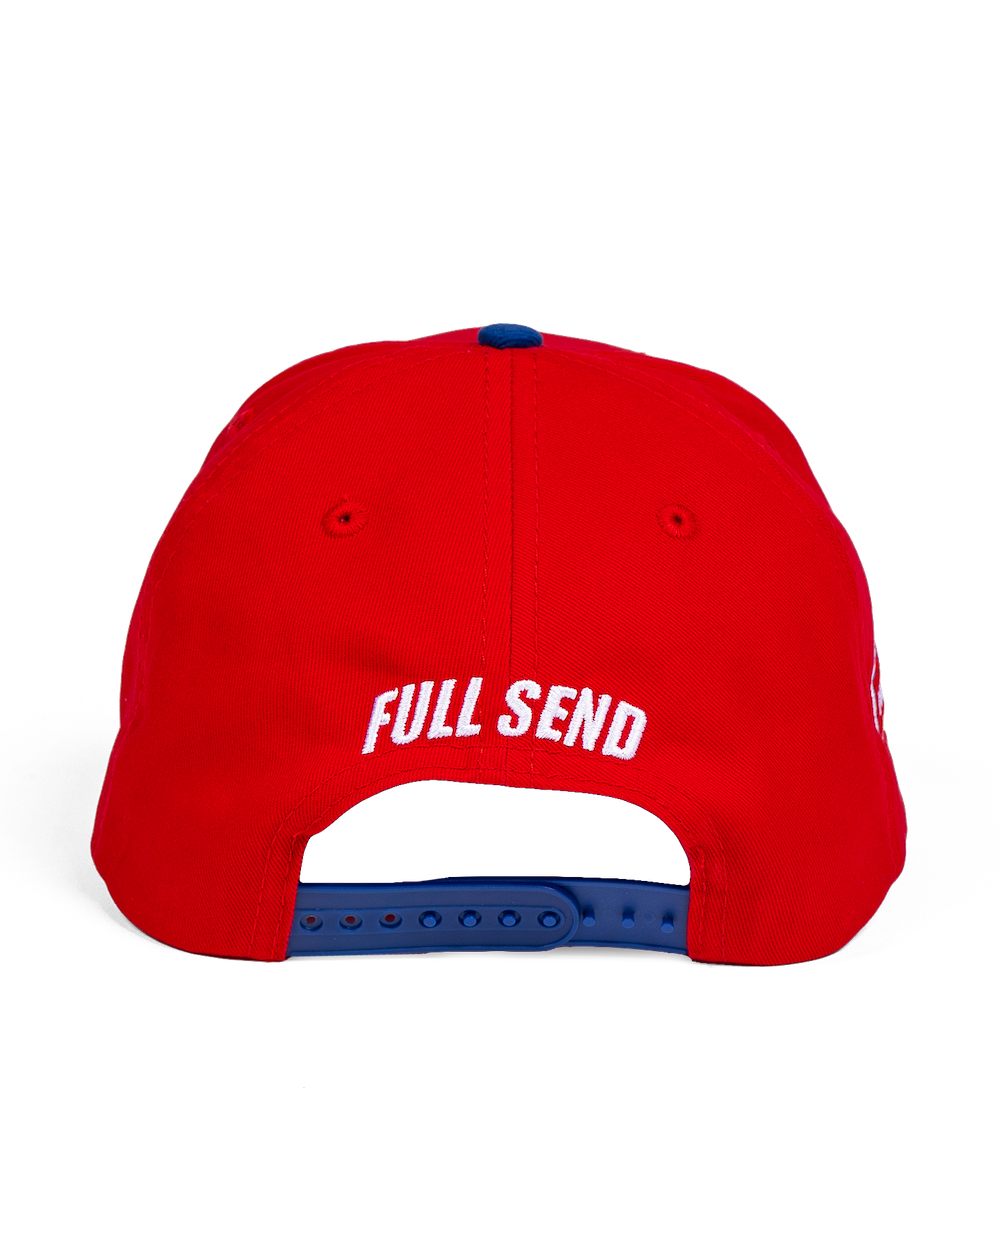 Happy Dad Sports Hat (Red)